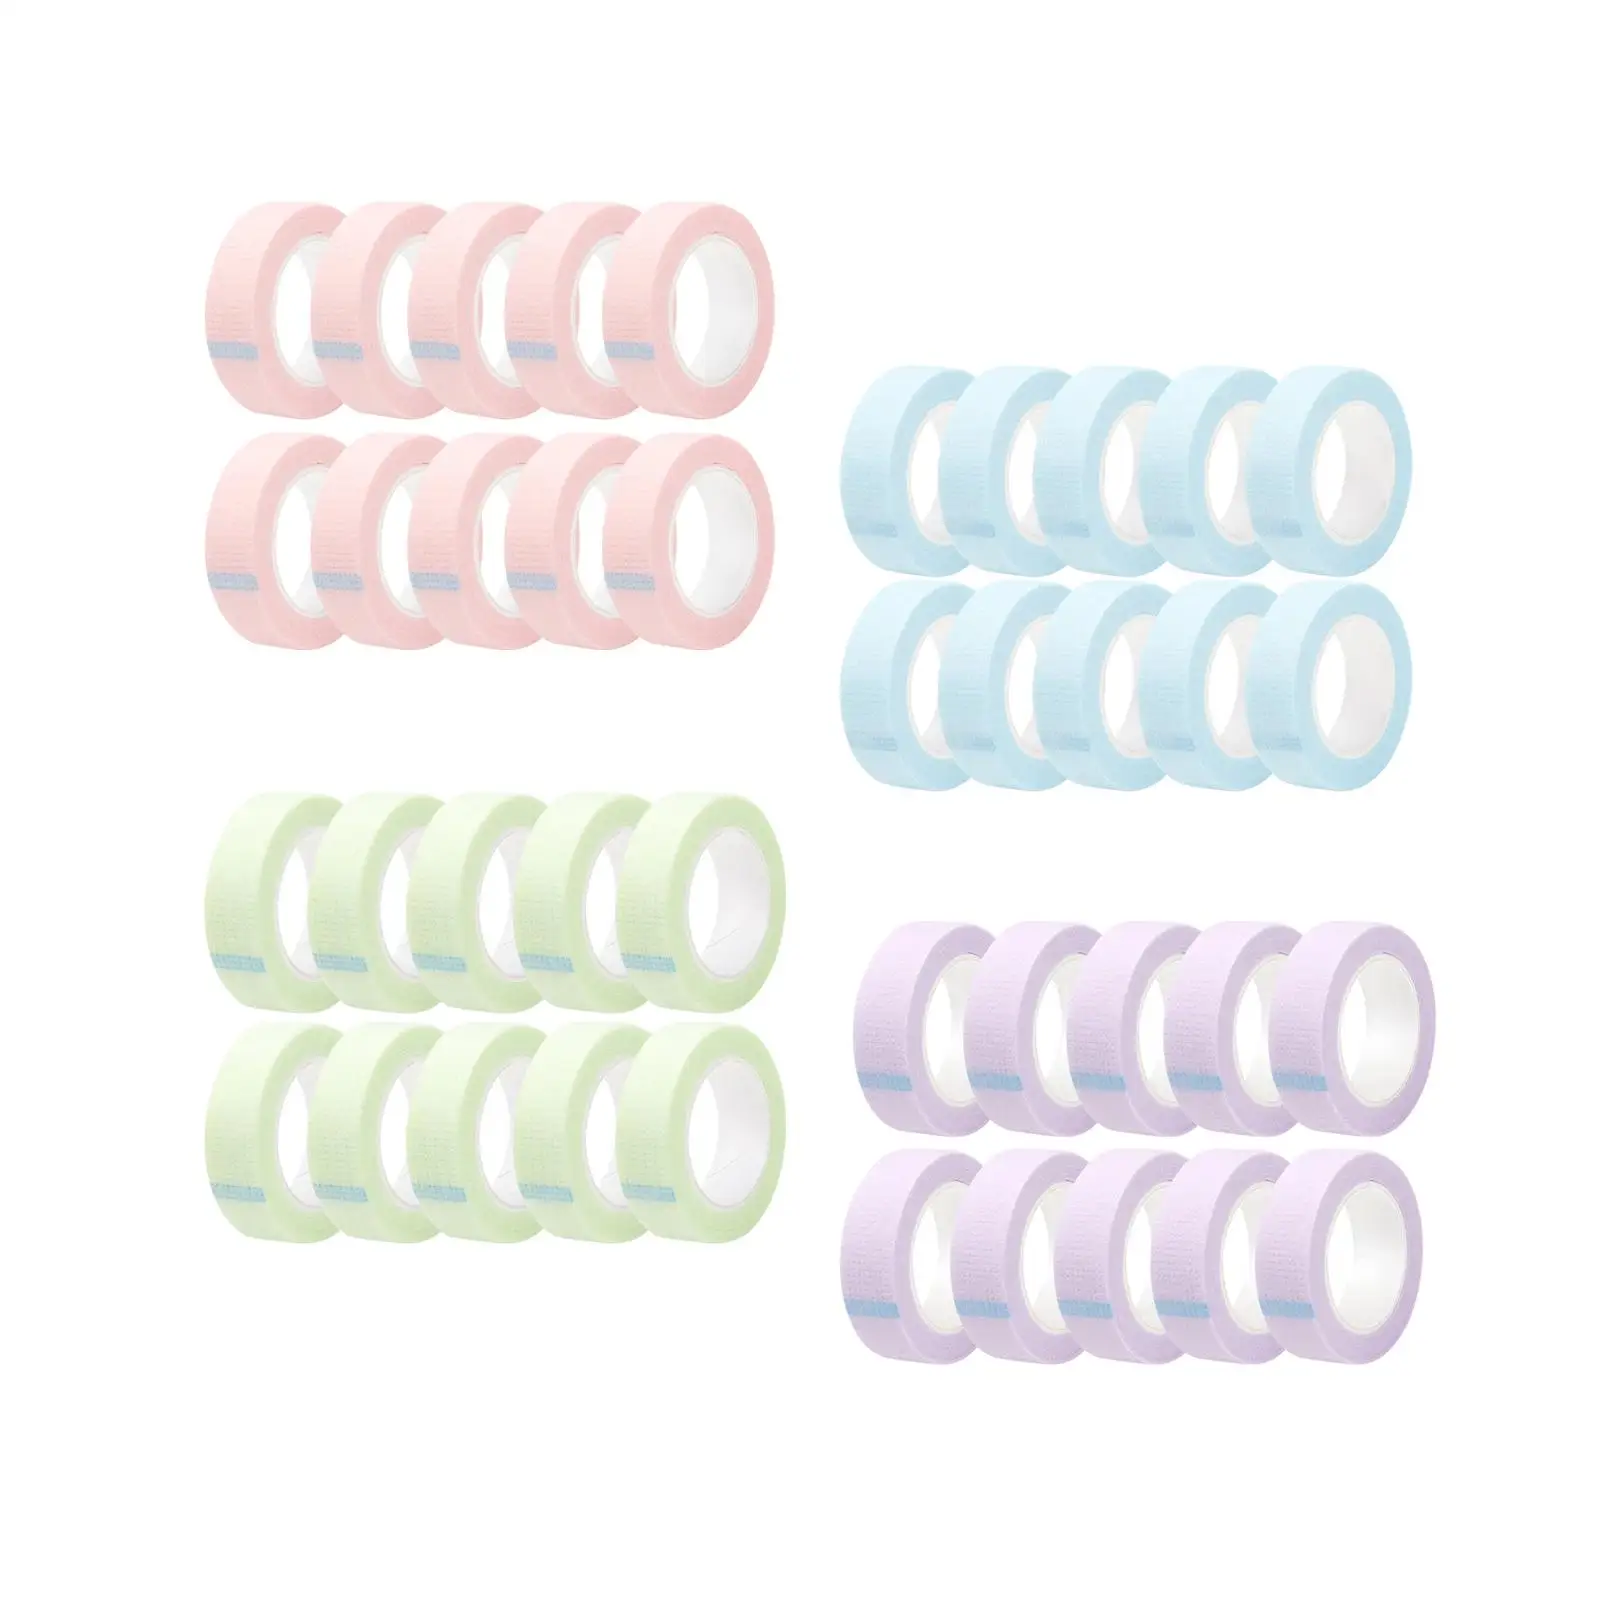 10x Eyelash Extension Tapes under Eye Tape Eyelash Extension Supplies for Personal Use Makeup Salons Professional Artists Girls